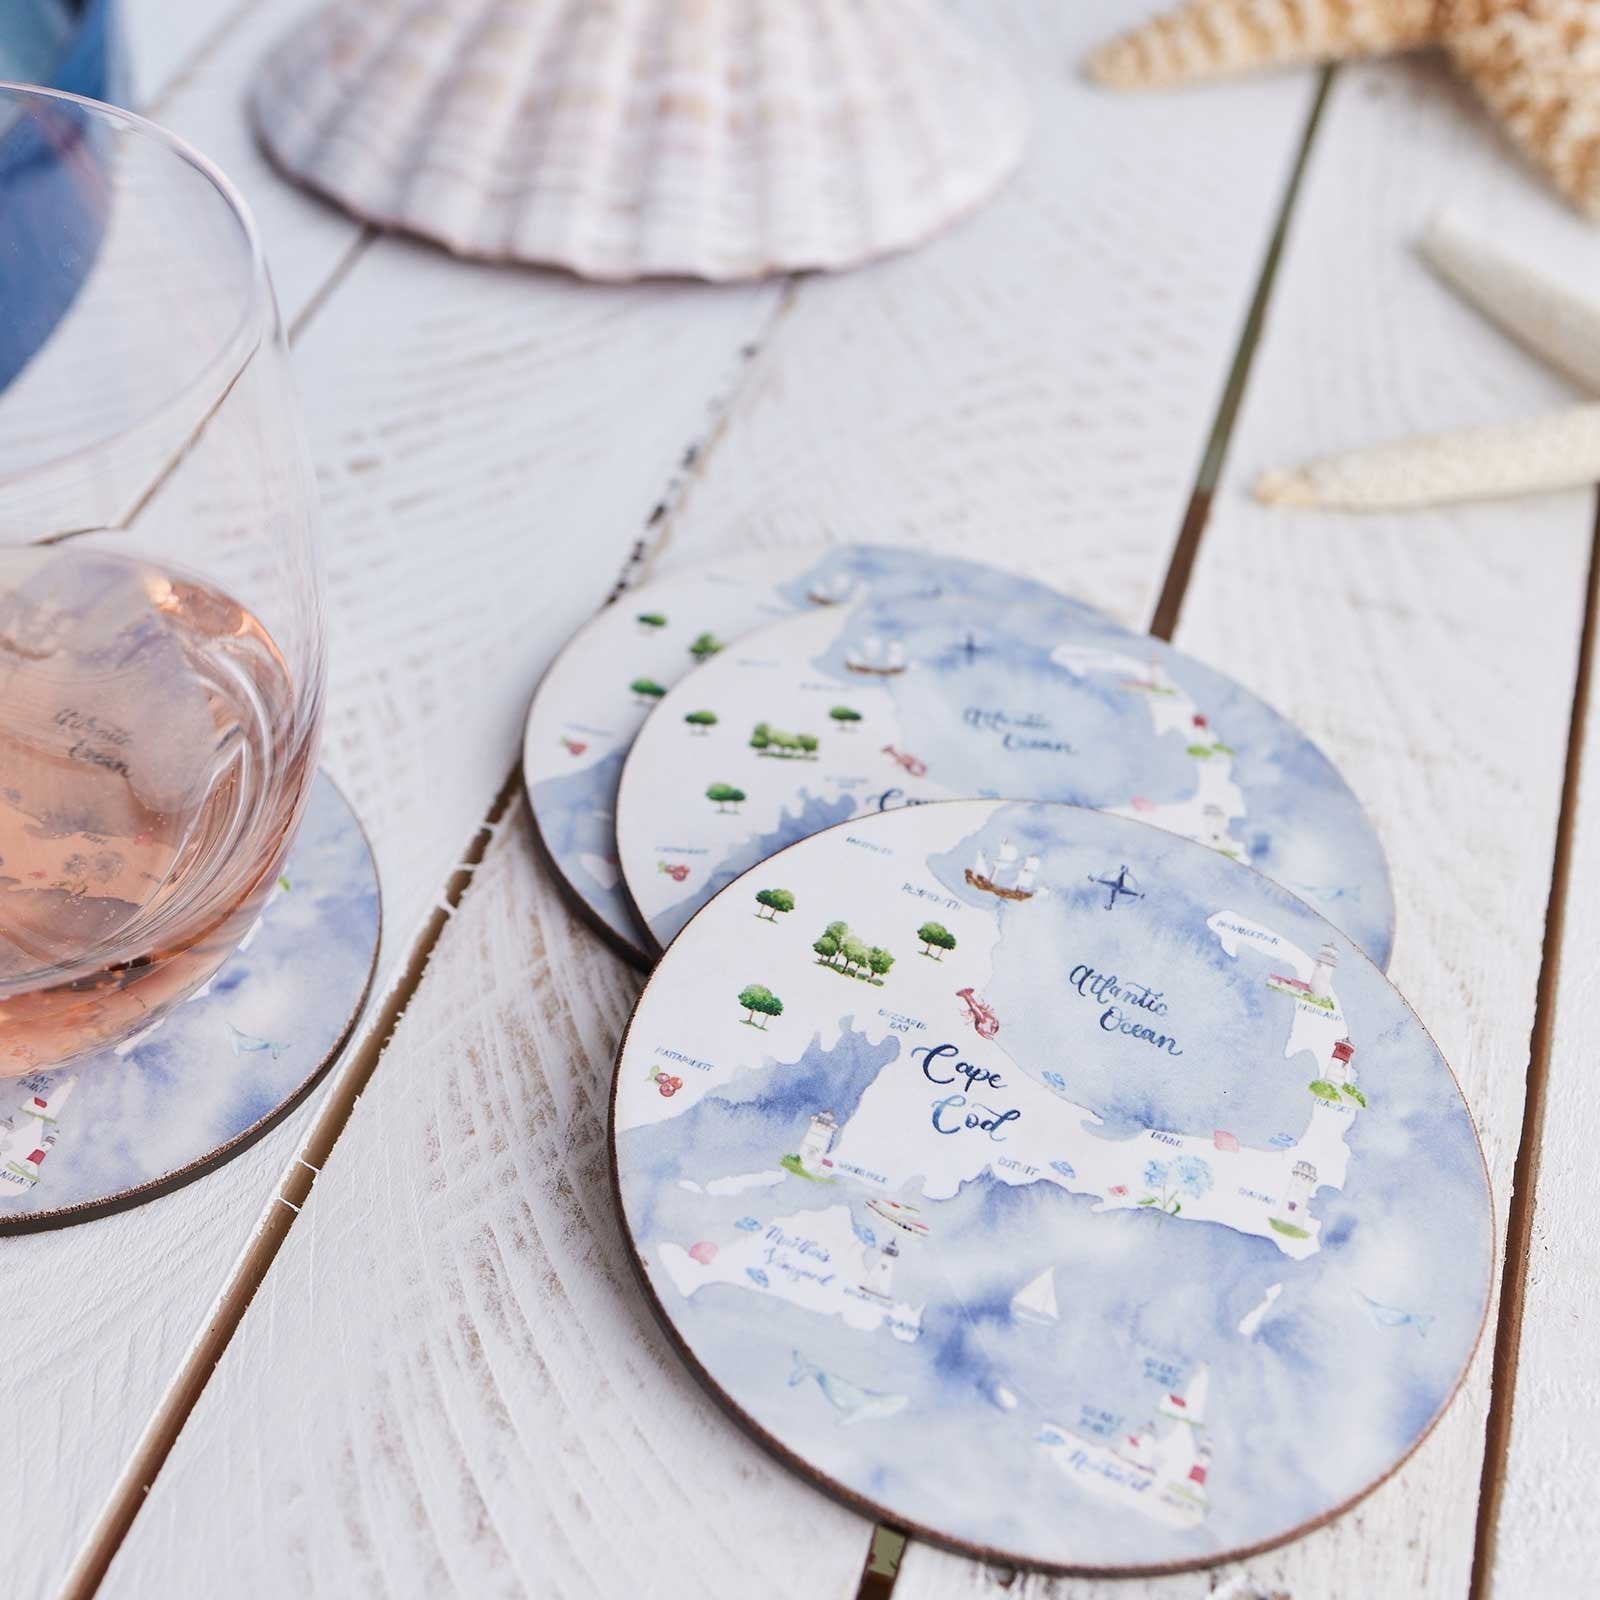 Cape And Islands Round Art Coasters - Set of 4 Coaster - rockflowerpaper